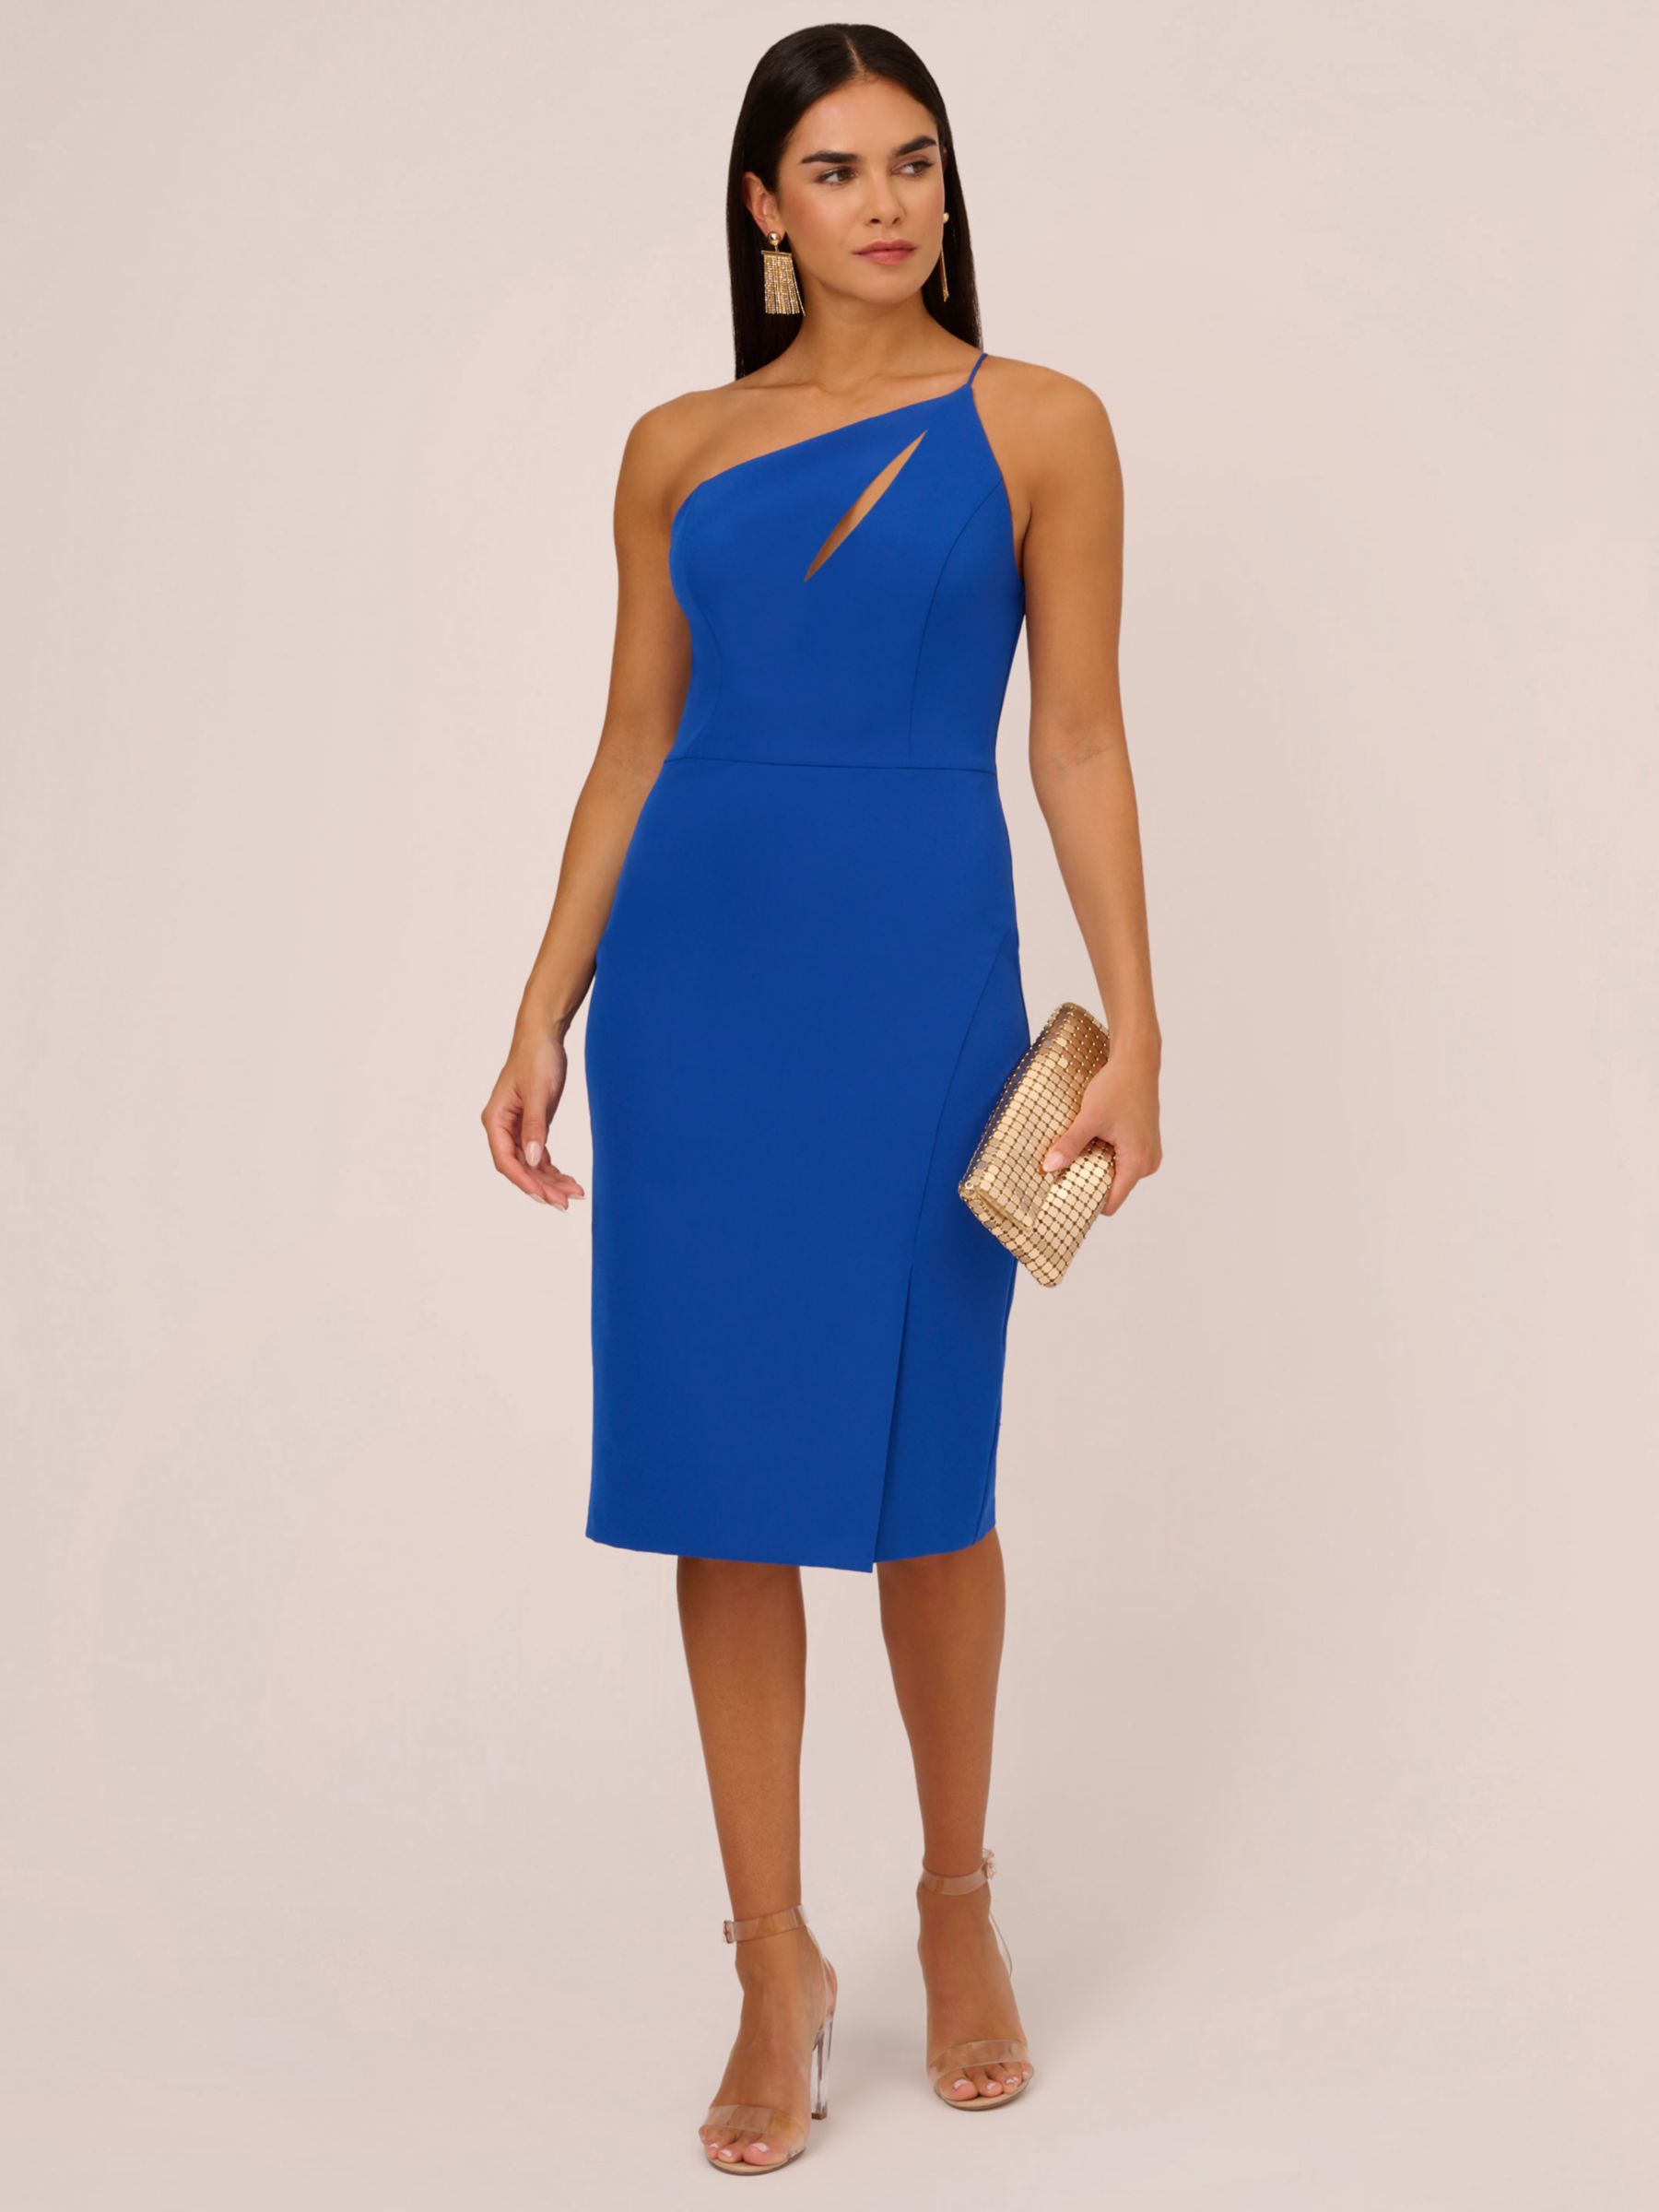 Aidan by Adrianna Papell Knit Crepe On Shoulder Dress, Royal Sapphire, 14